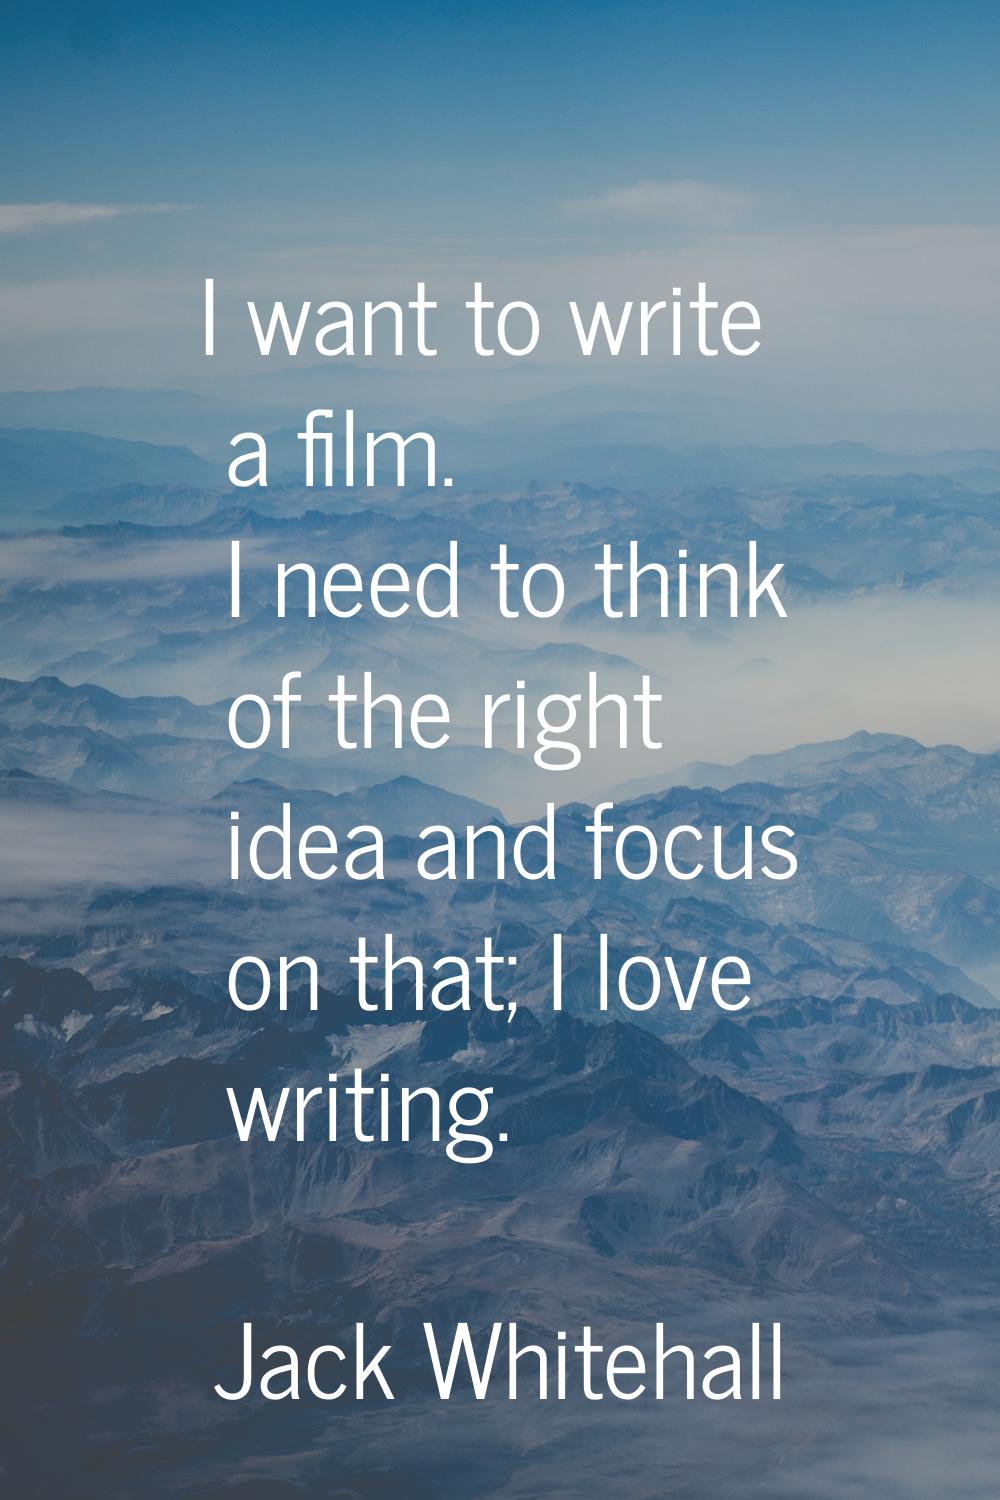 I want to write a film. I need to think of the right idea and focus on that; I love writing.